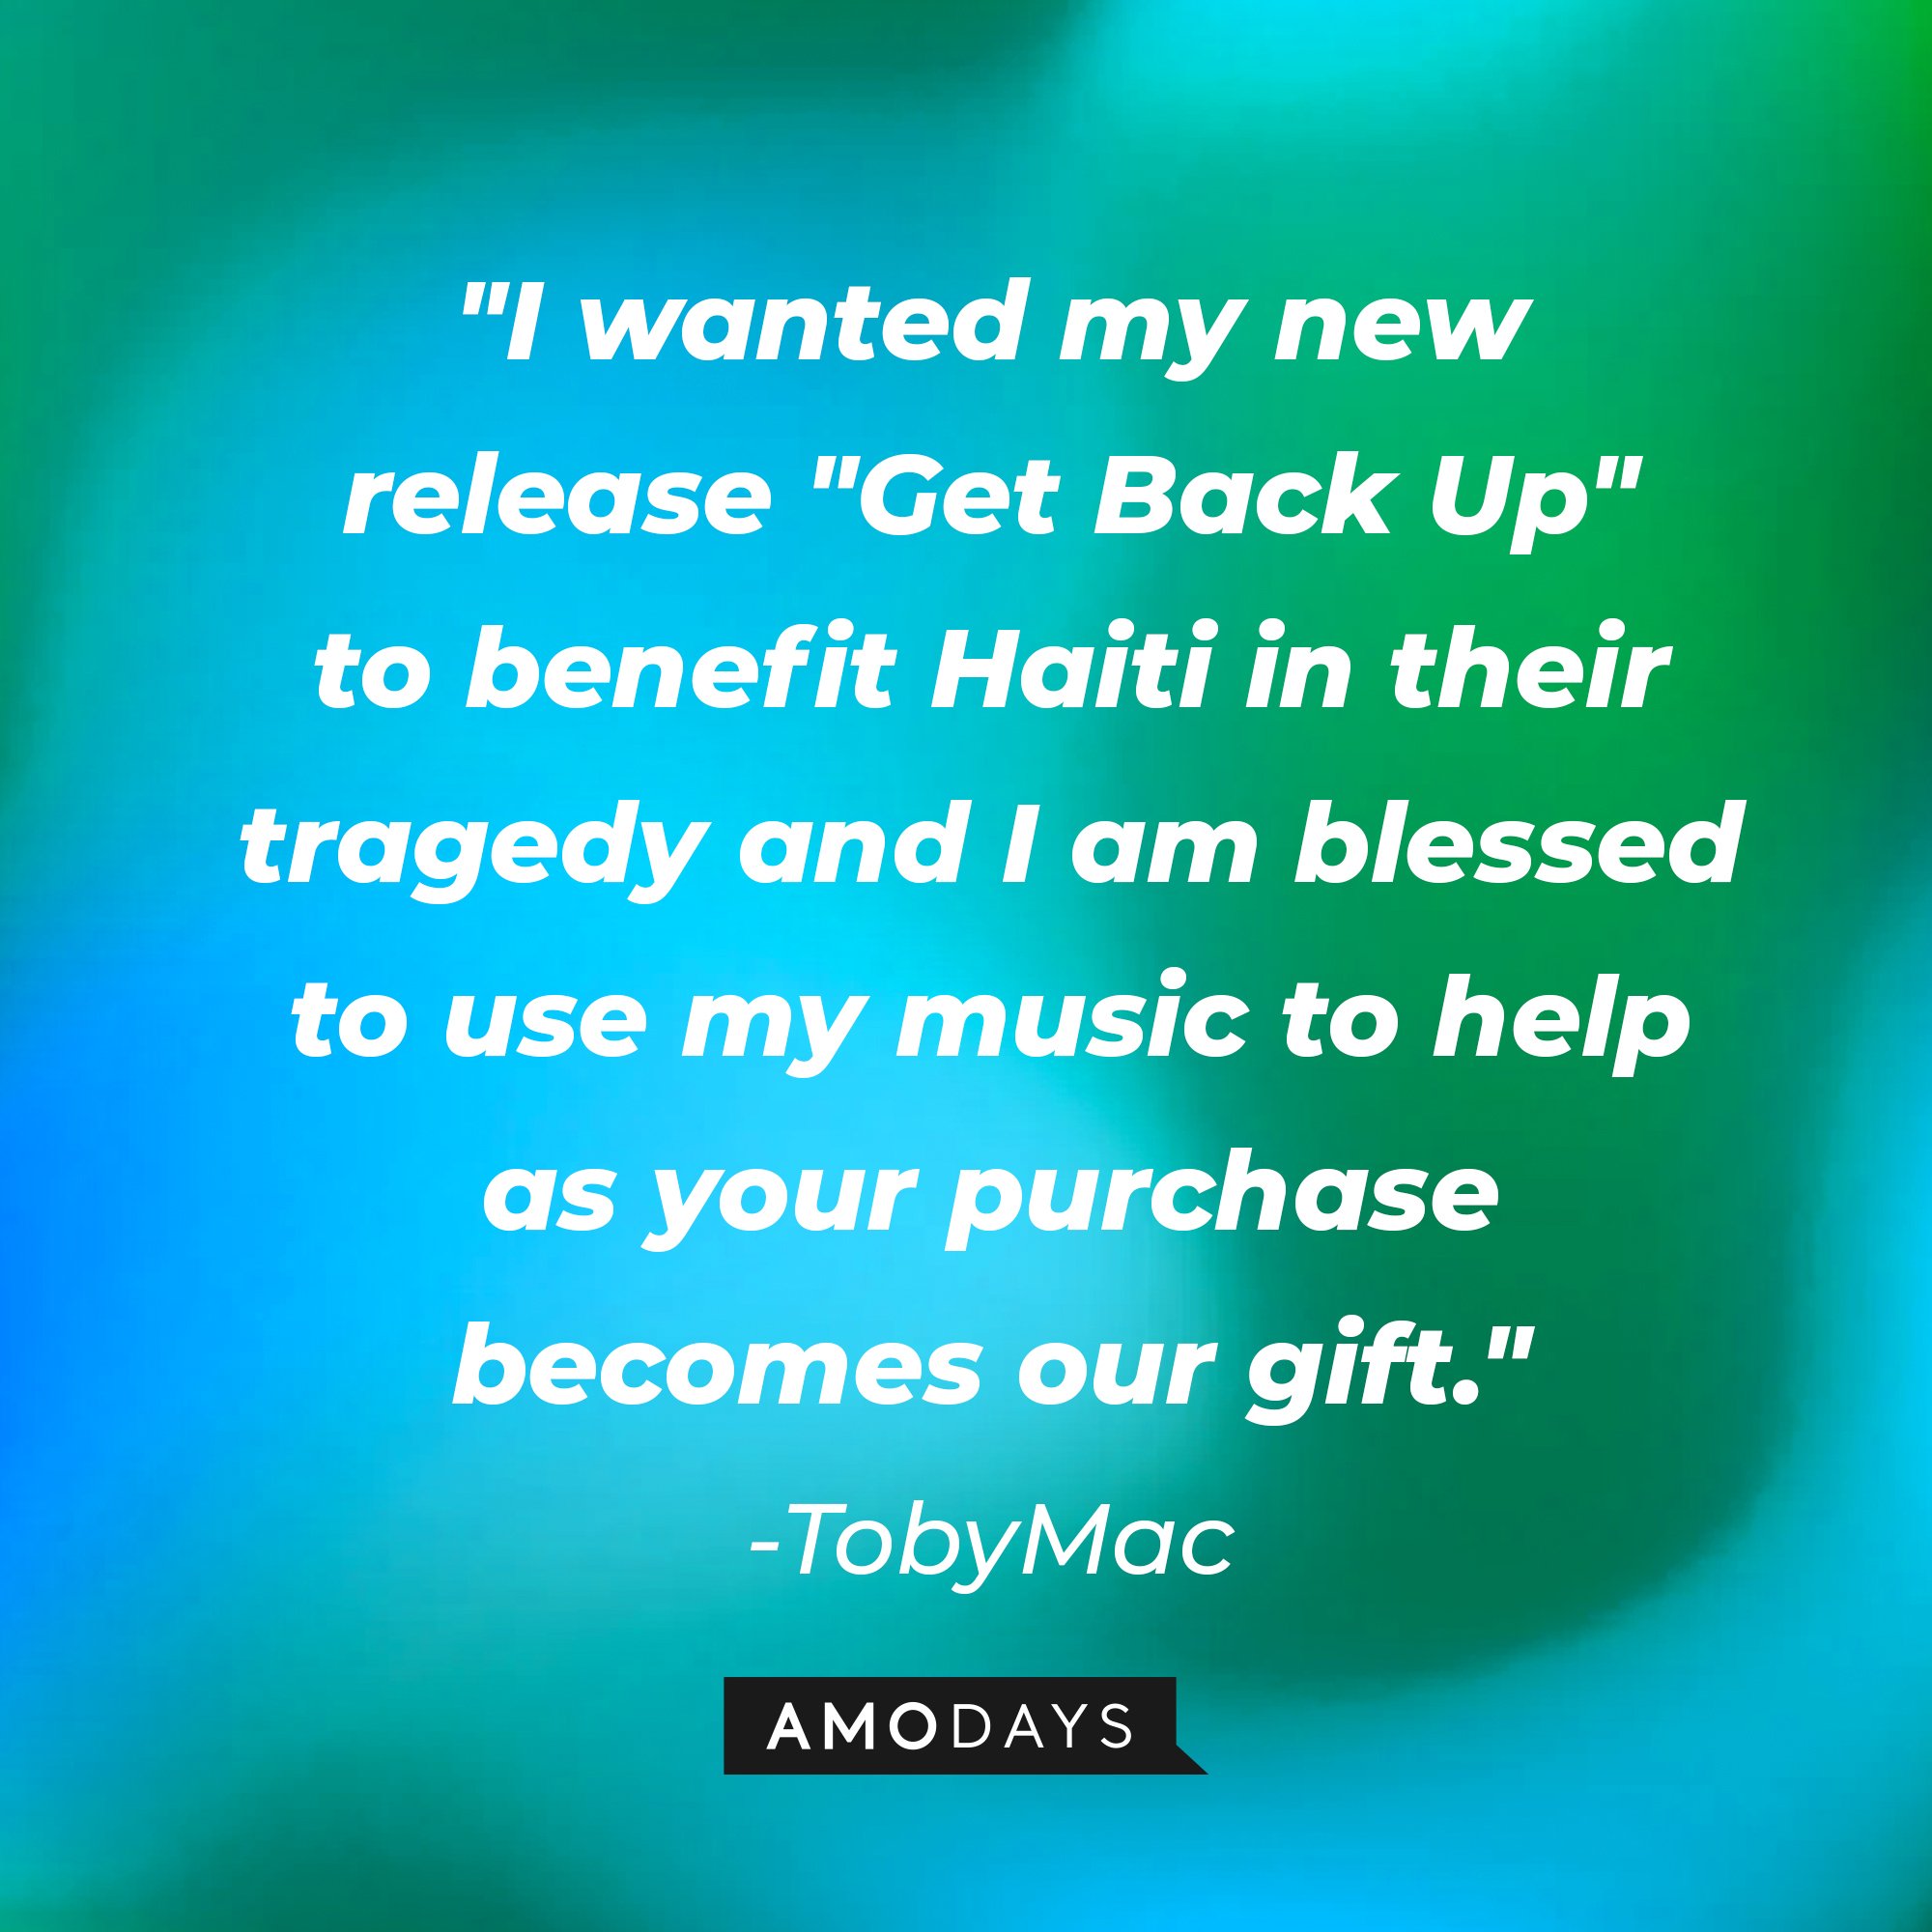 TobyMac's quote: "I wanted my new release "Get Back Up" to benefit Haiti in their tragedy and I am blessed to use my music to help as your purchase becomes our gift." | Image: AmoDays